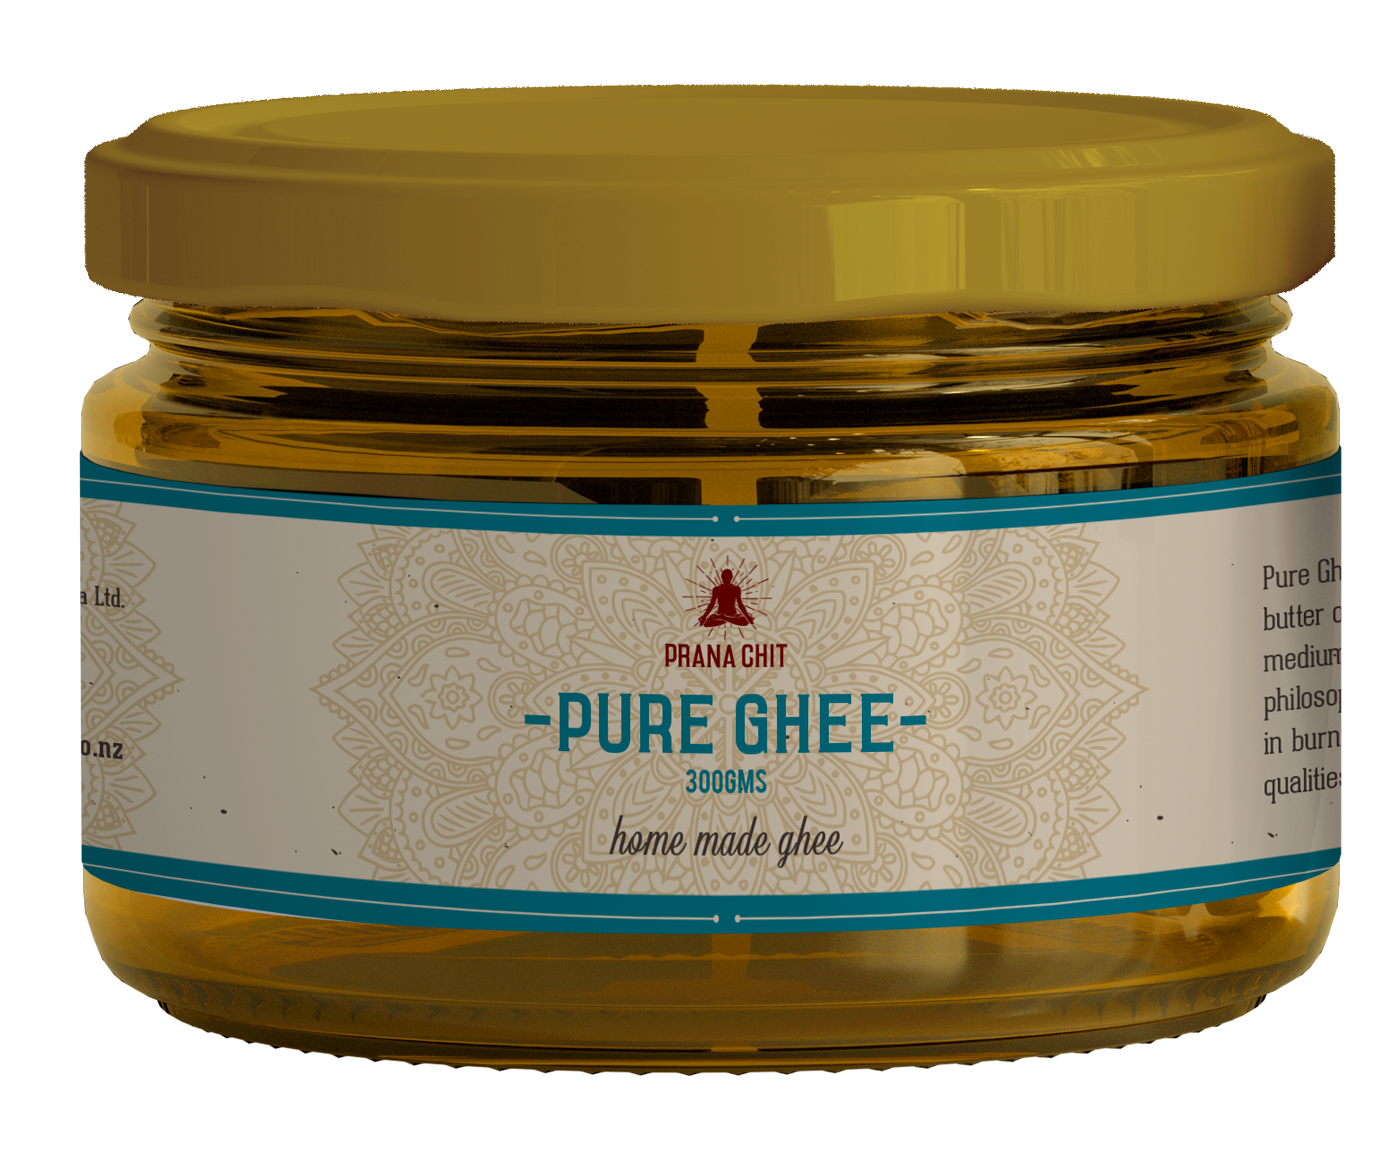 Prana Chit's packaging for their Pure Ghee product.